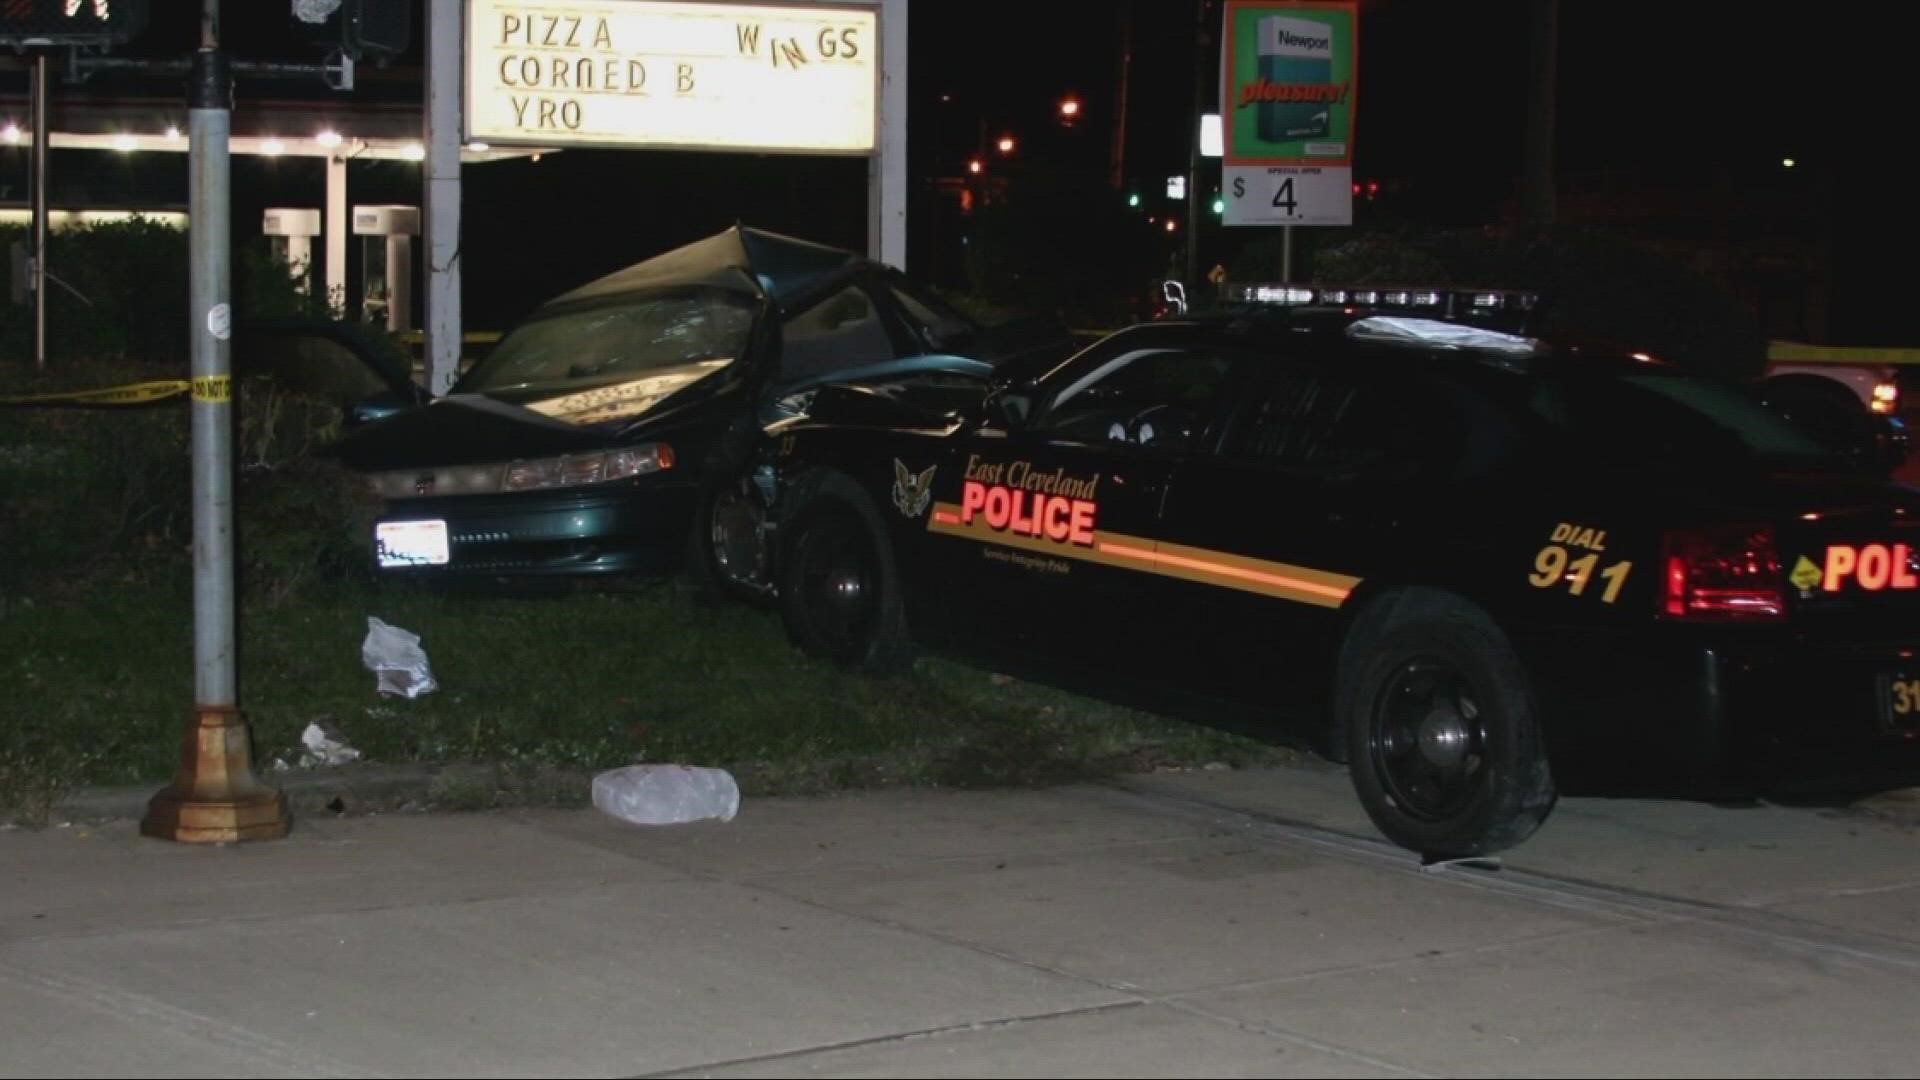 The Ohio Supreme Court has unanimously ruled in favor of two people who were struck by an East Cleveland police cruiser during a 2008 chase.